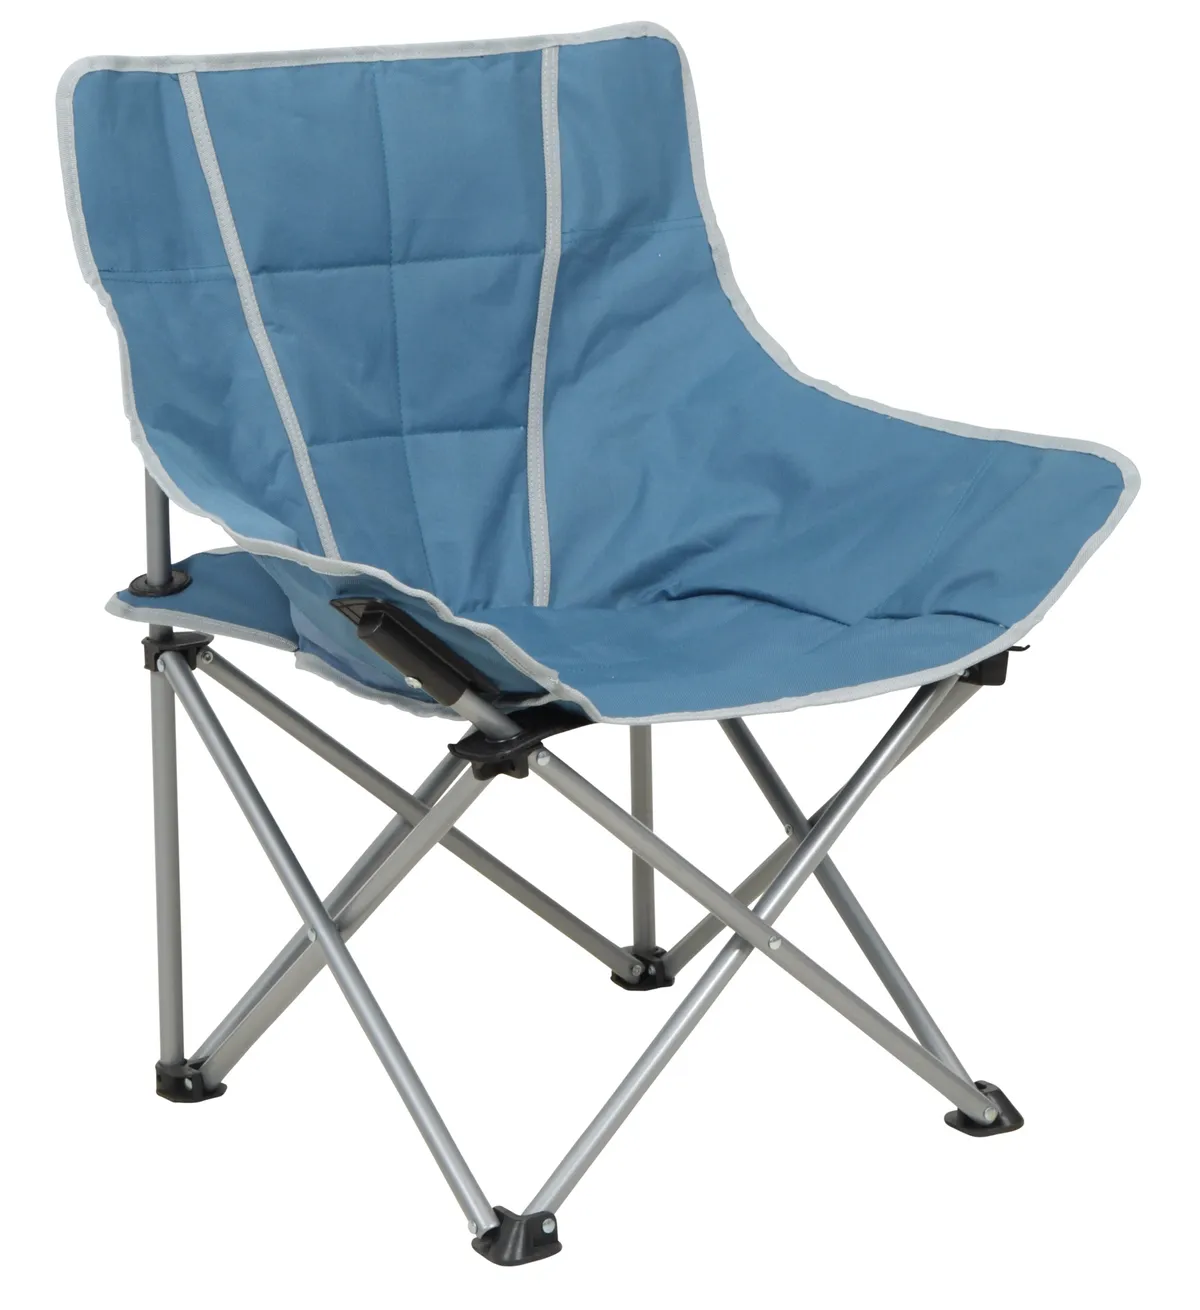 Blue folding chair for camping